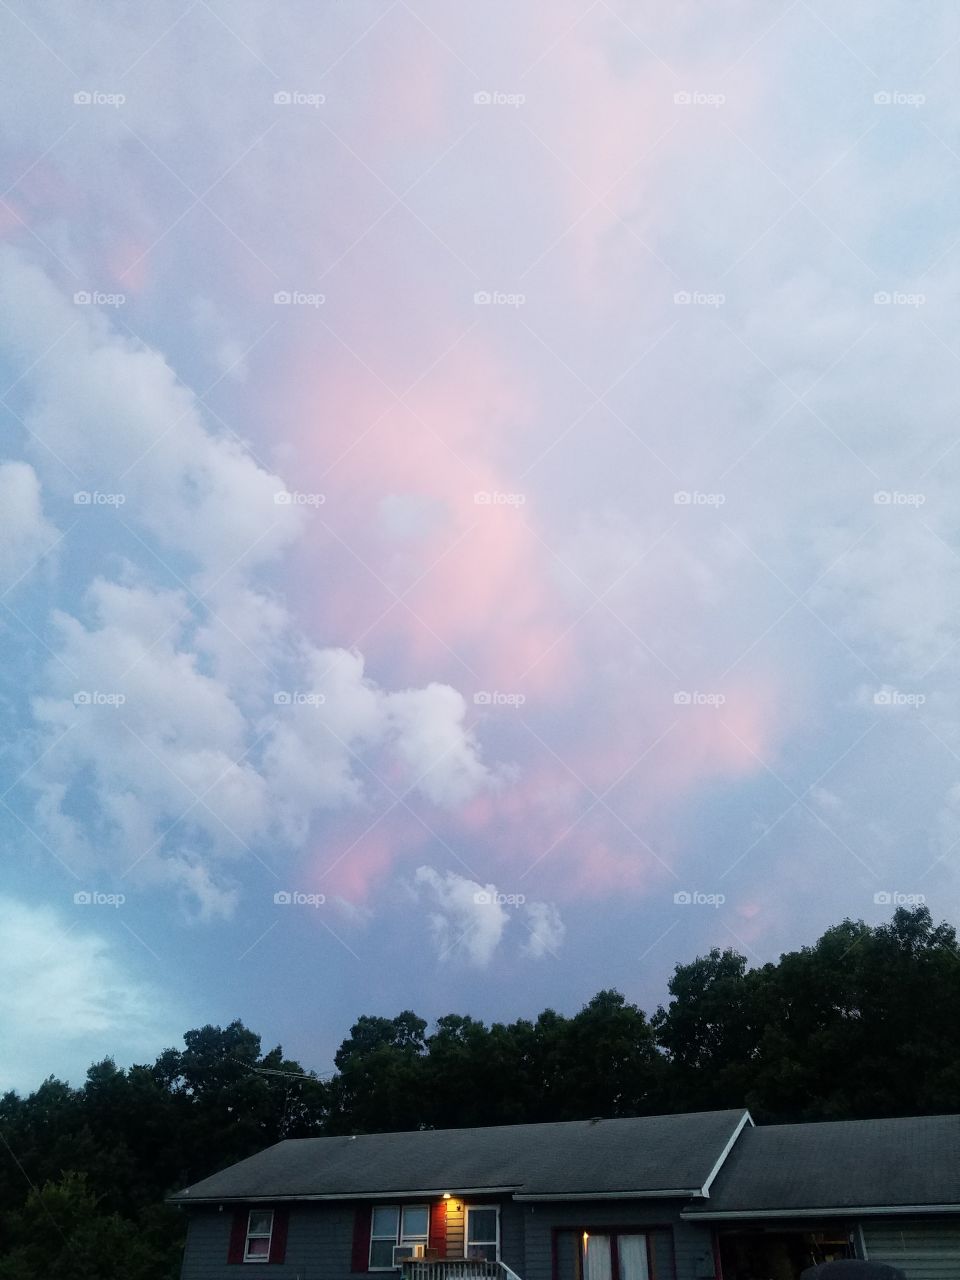 beautiful colors in the clouds.